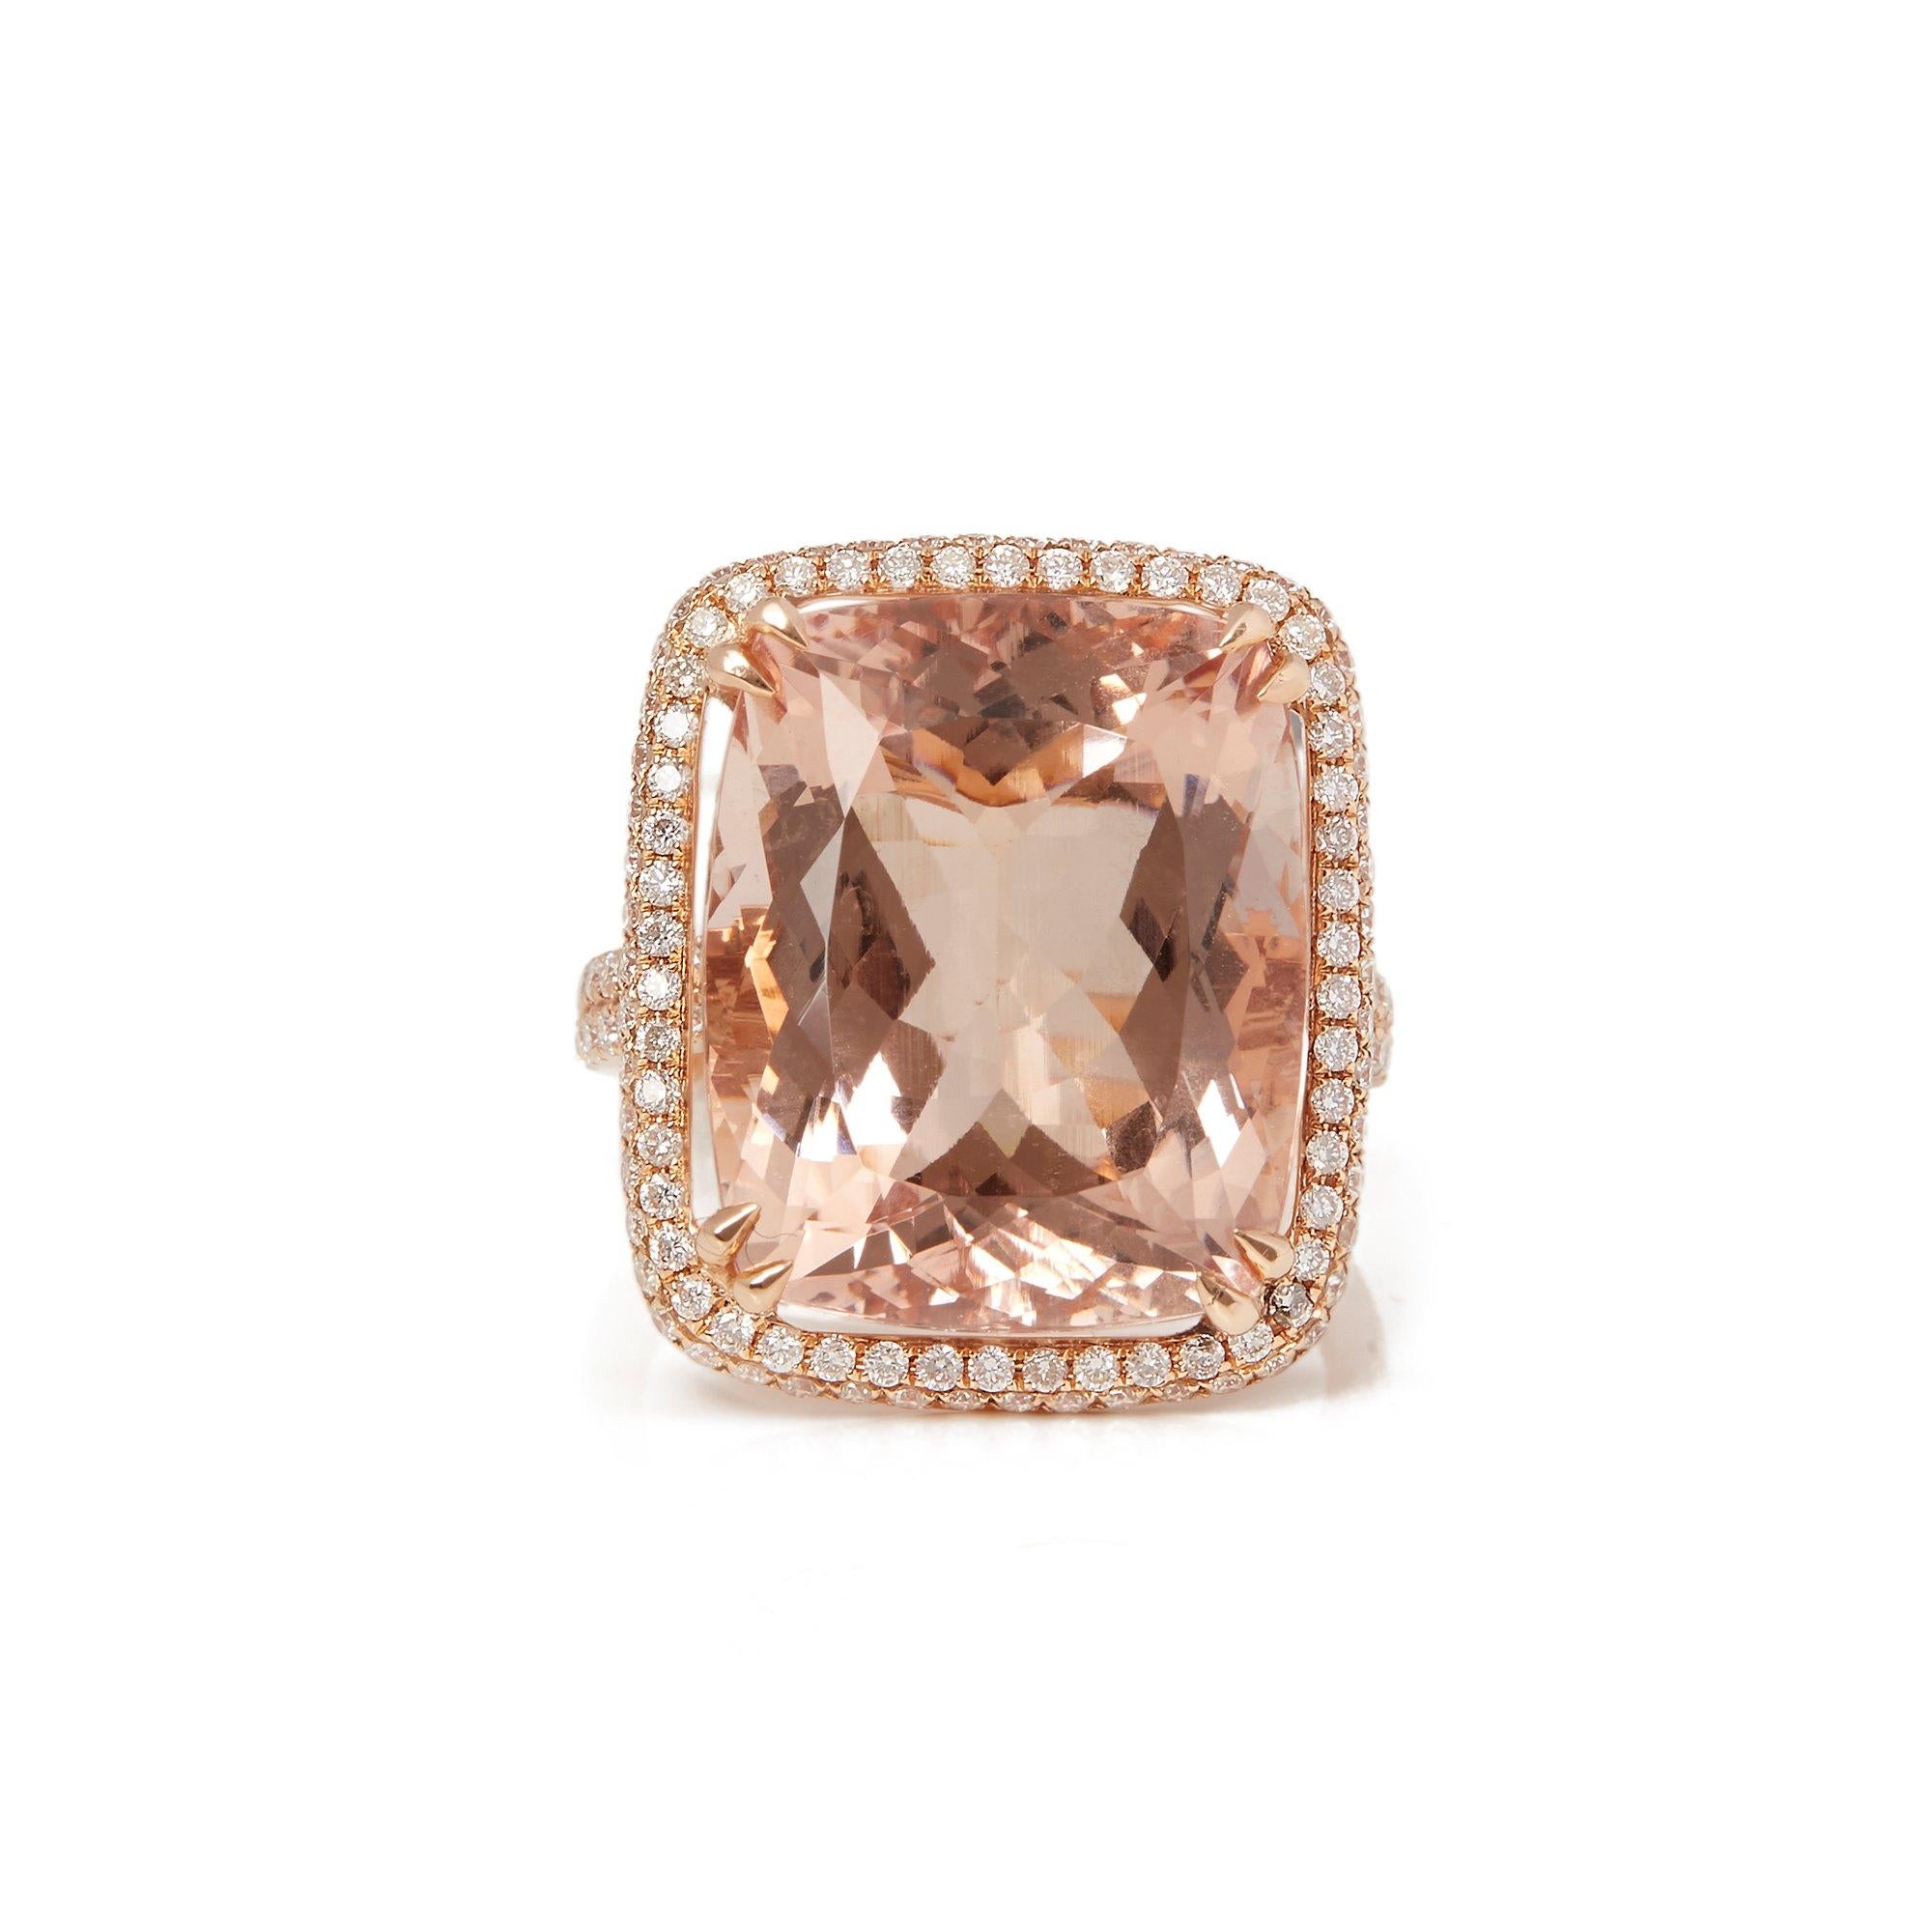 This ring designed by David Jerome is from his private collection and features one cushion cut morganite totalling 16.71cts sourced in Brazil. Set with round brilliant cut Diamonds totalling 0.45cts mounted in an 18k rose gold setting. UK finger